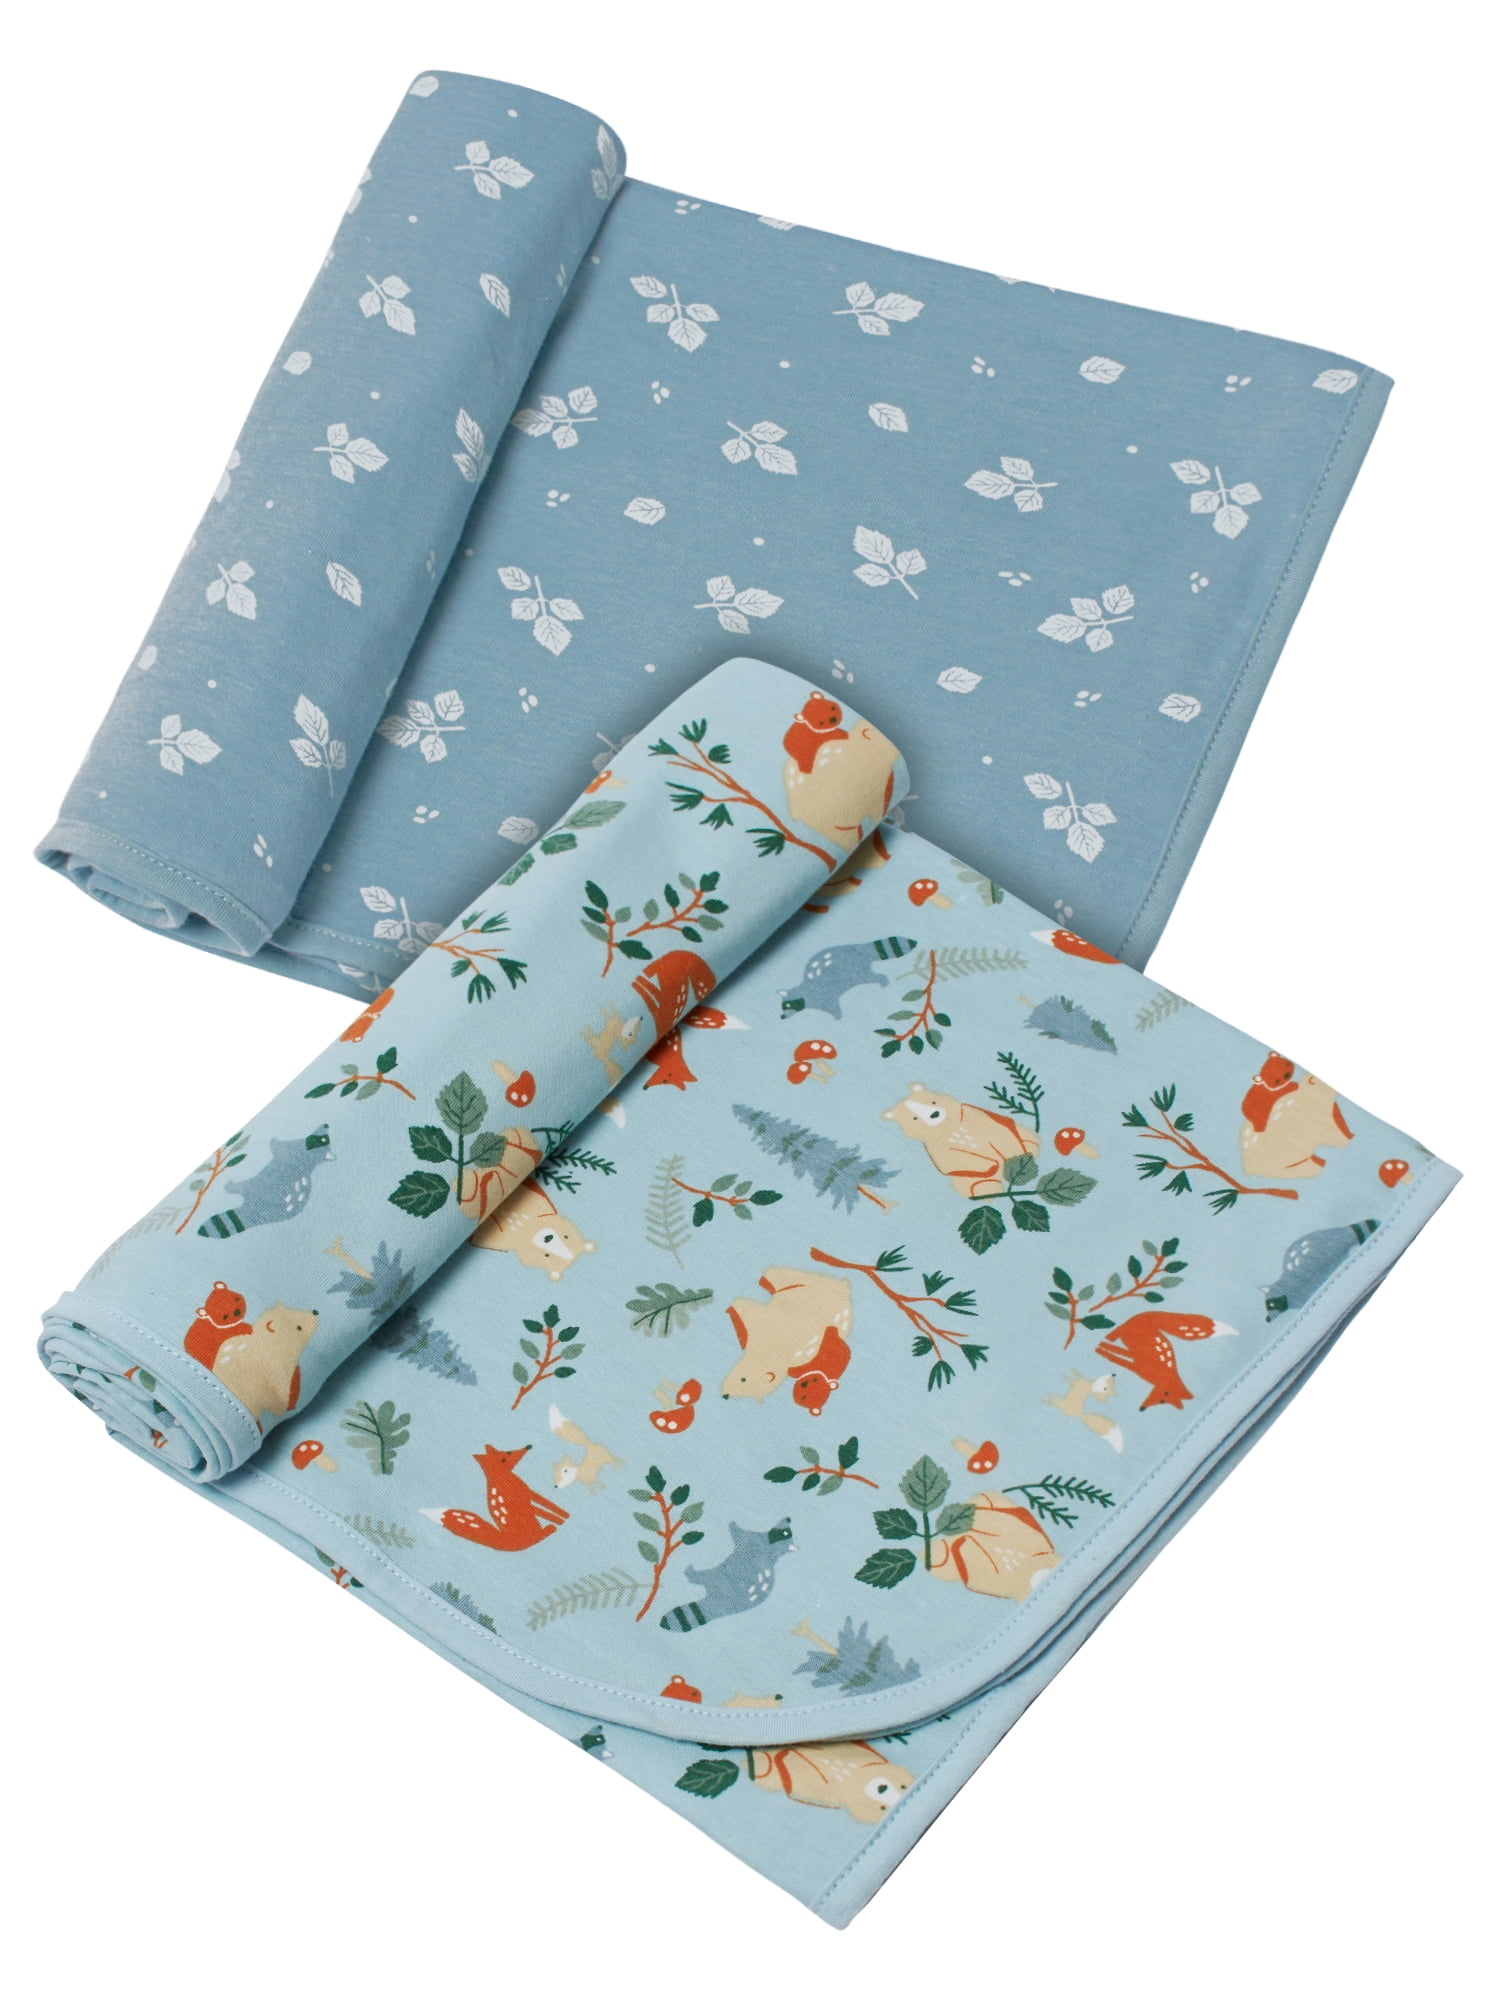 Modern Moments by Gerber Baby Boy XL Ultra Soft & Stretchy Swaddle Blankets, 2-Pack, Woodland Blue